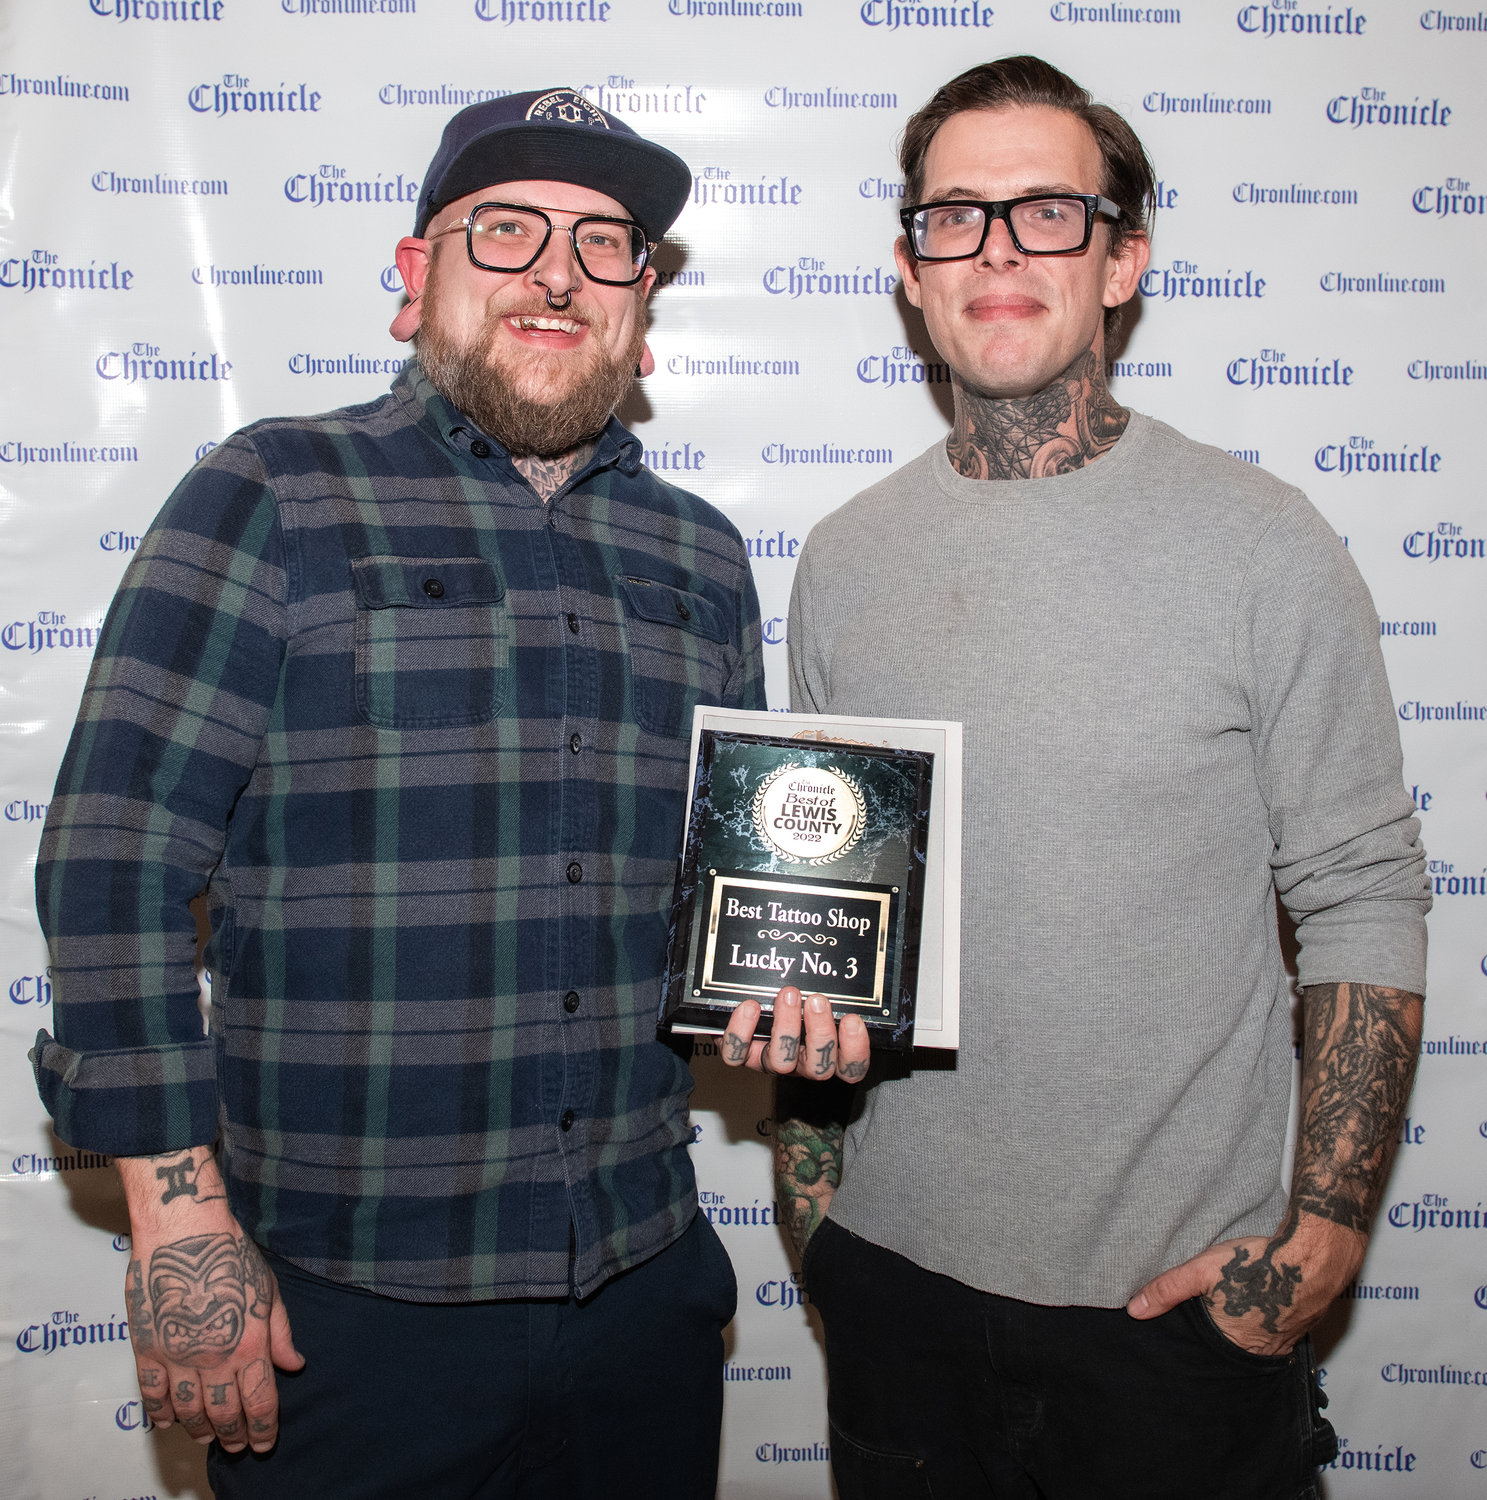 Lucky No. 3 won “Best Tattoo Shop” during the 2022 Best of Lewis County event hosted by The Chronicle at The Juice Box Thursday evening in Centralia.